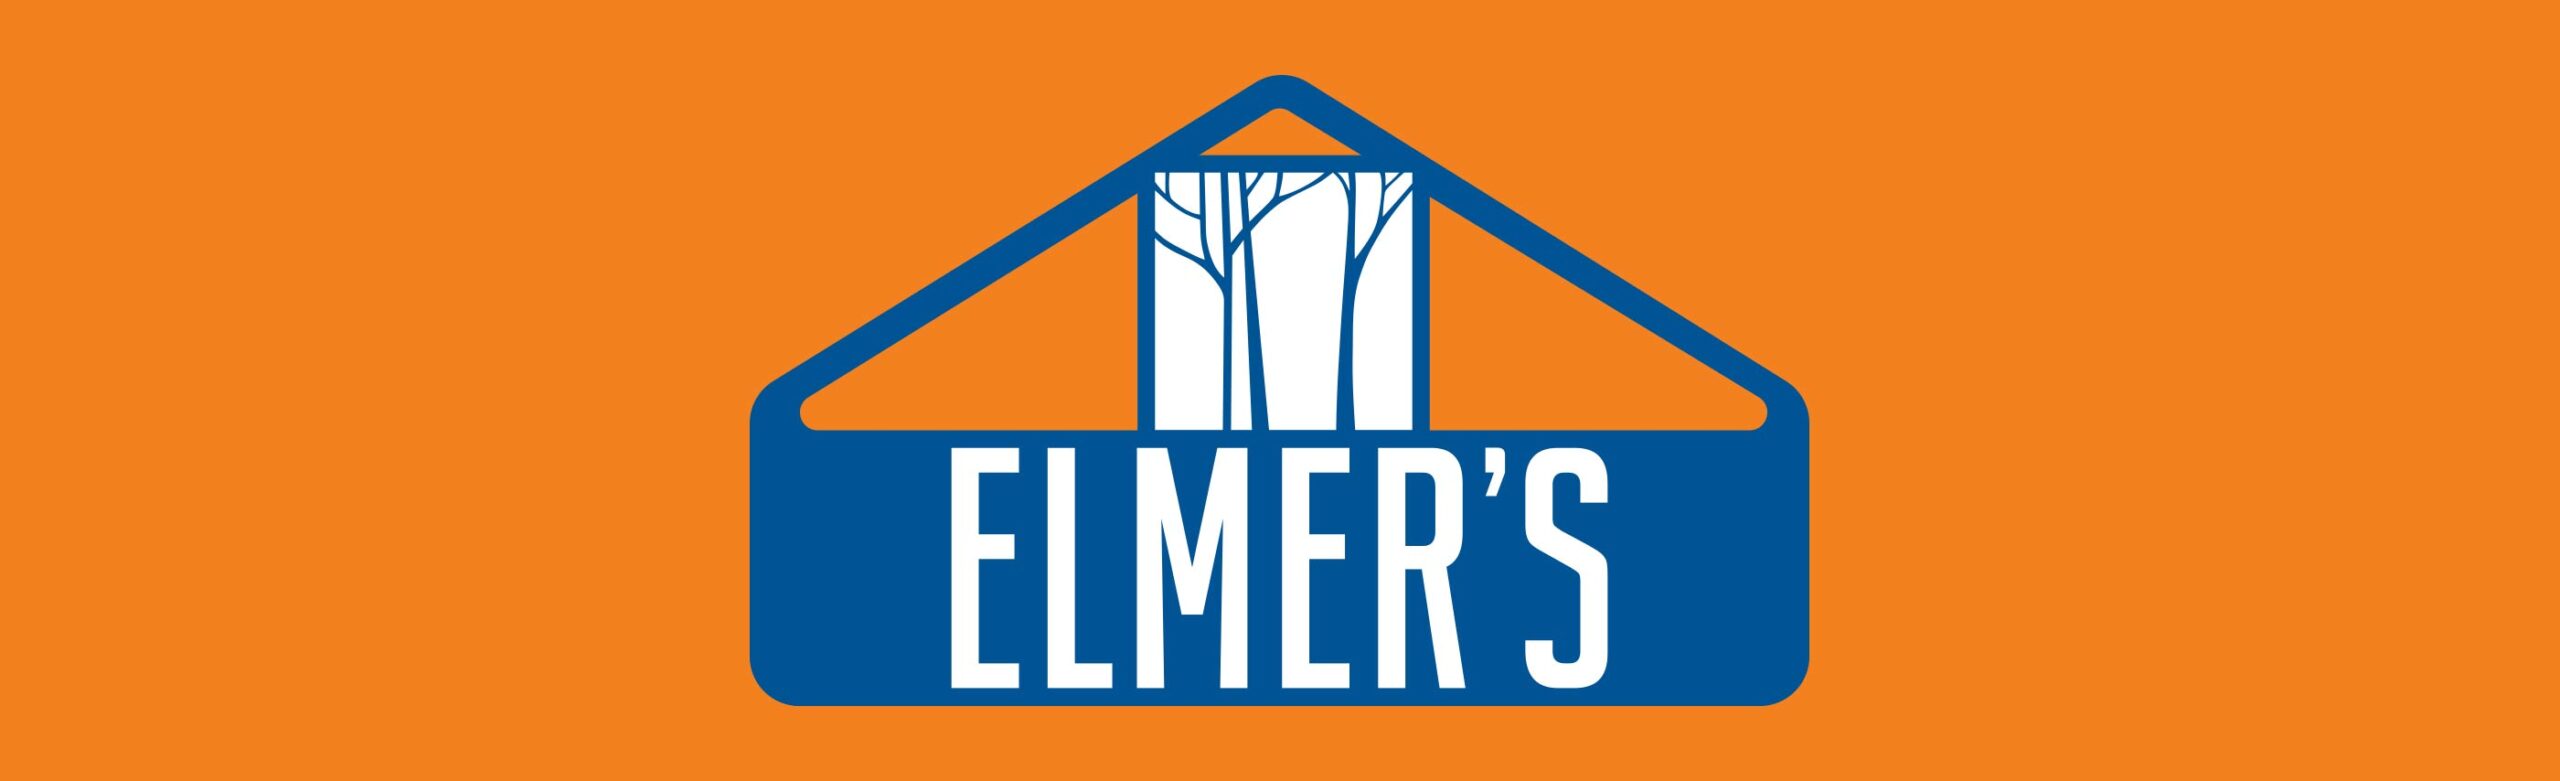 Elmer’s Glue Partners with ELM for Stickiest Event in the World Image